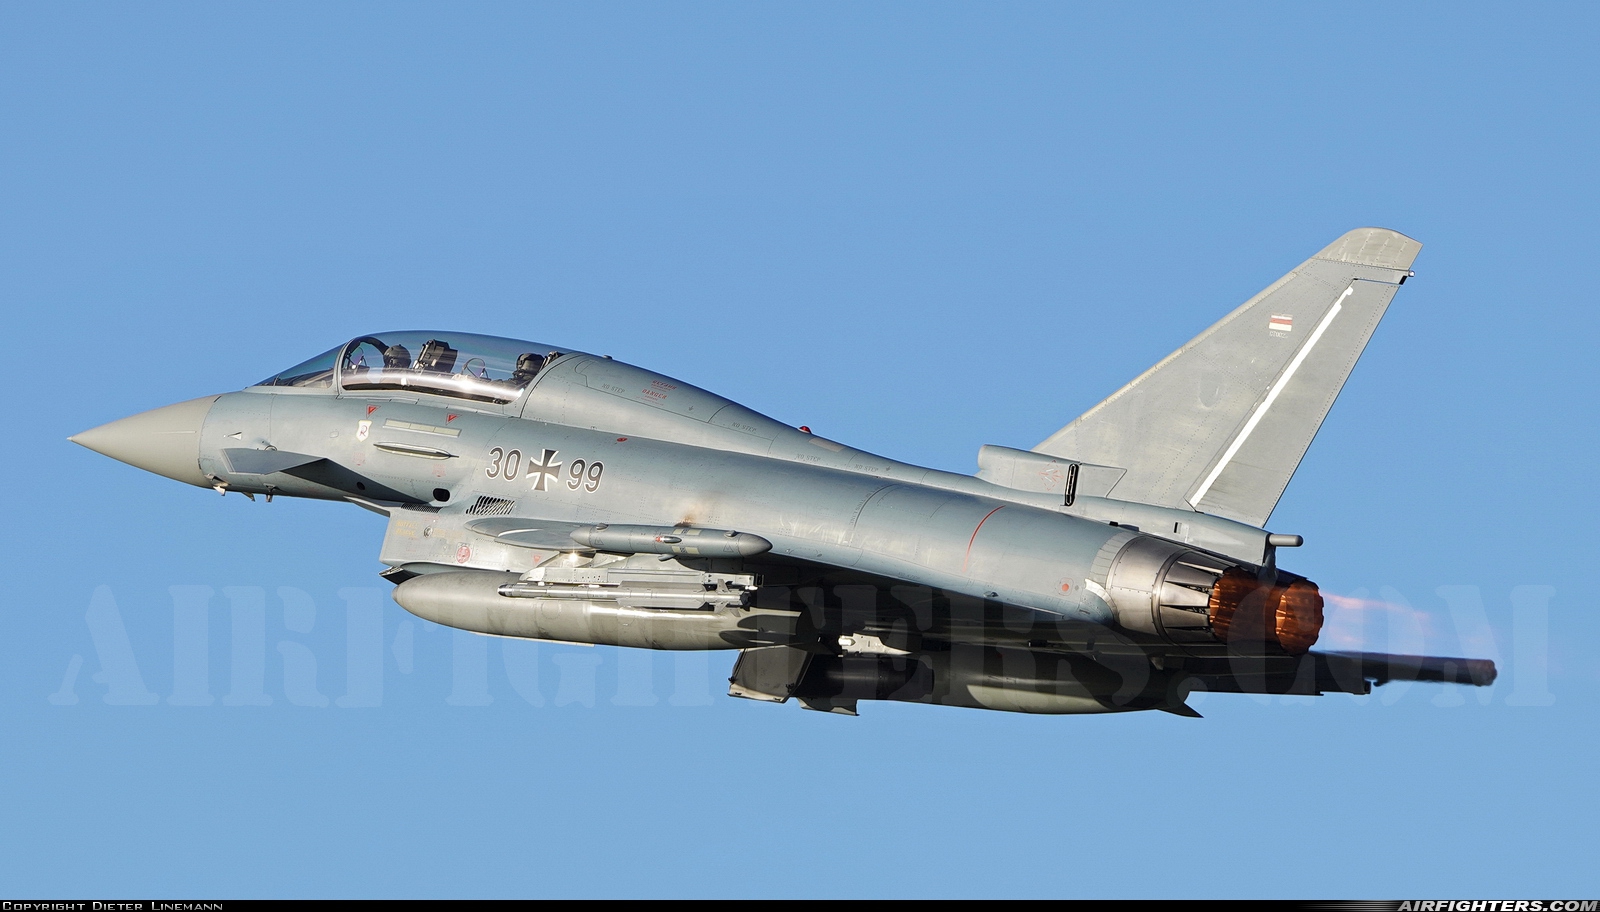 Germany - Air Force Eurofighter EF-2000 Typhoon T 30+99 at Wittmundhafen (Wittmund) (ETNT), Germany